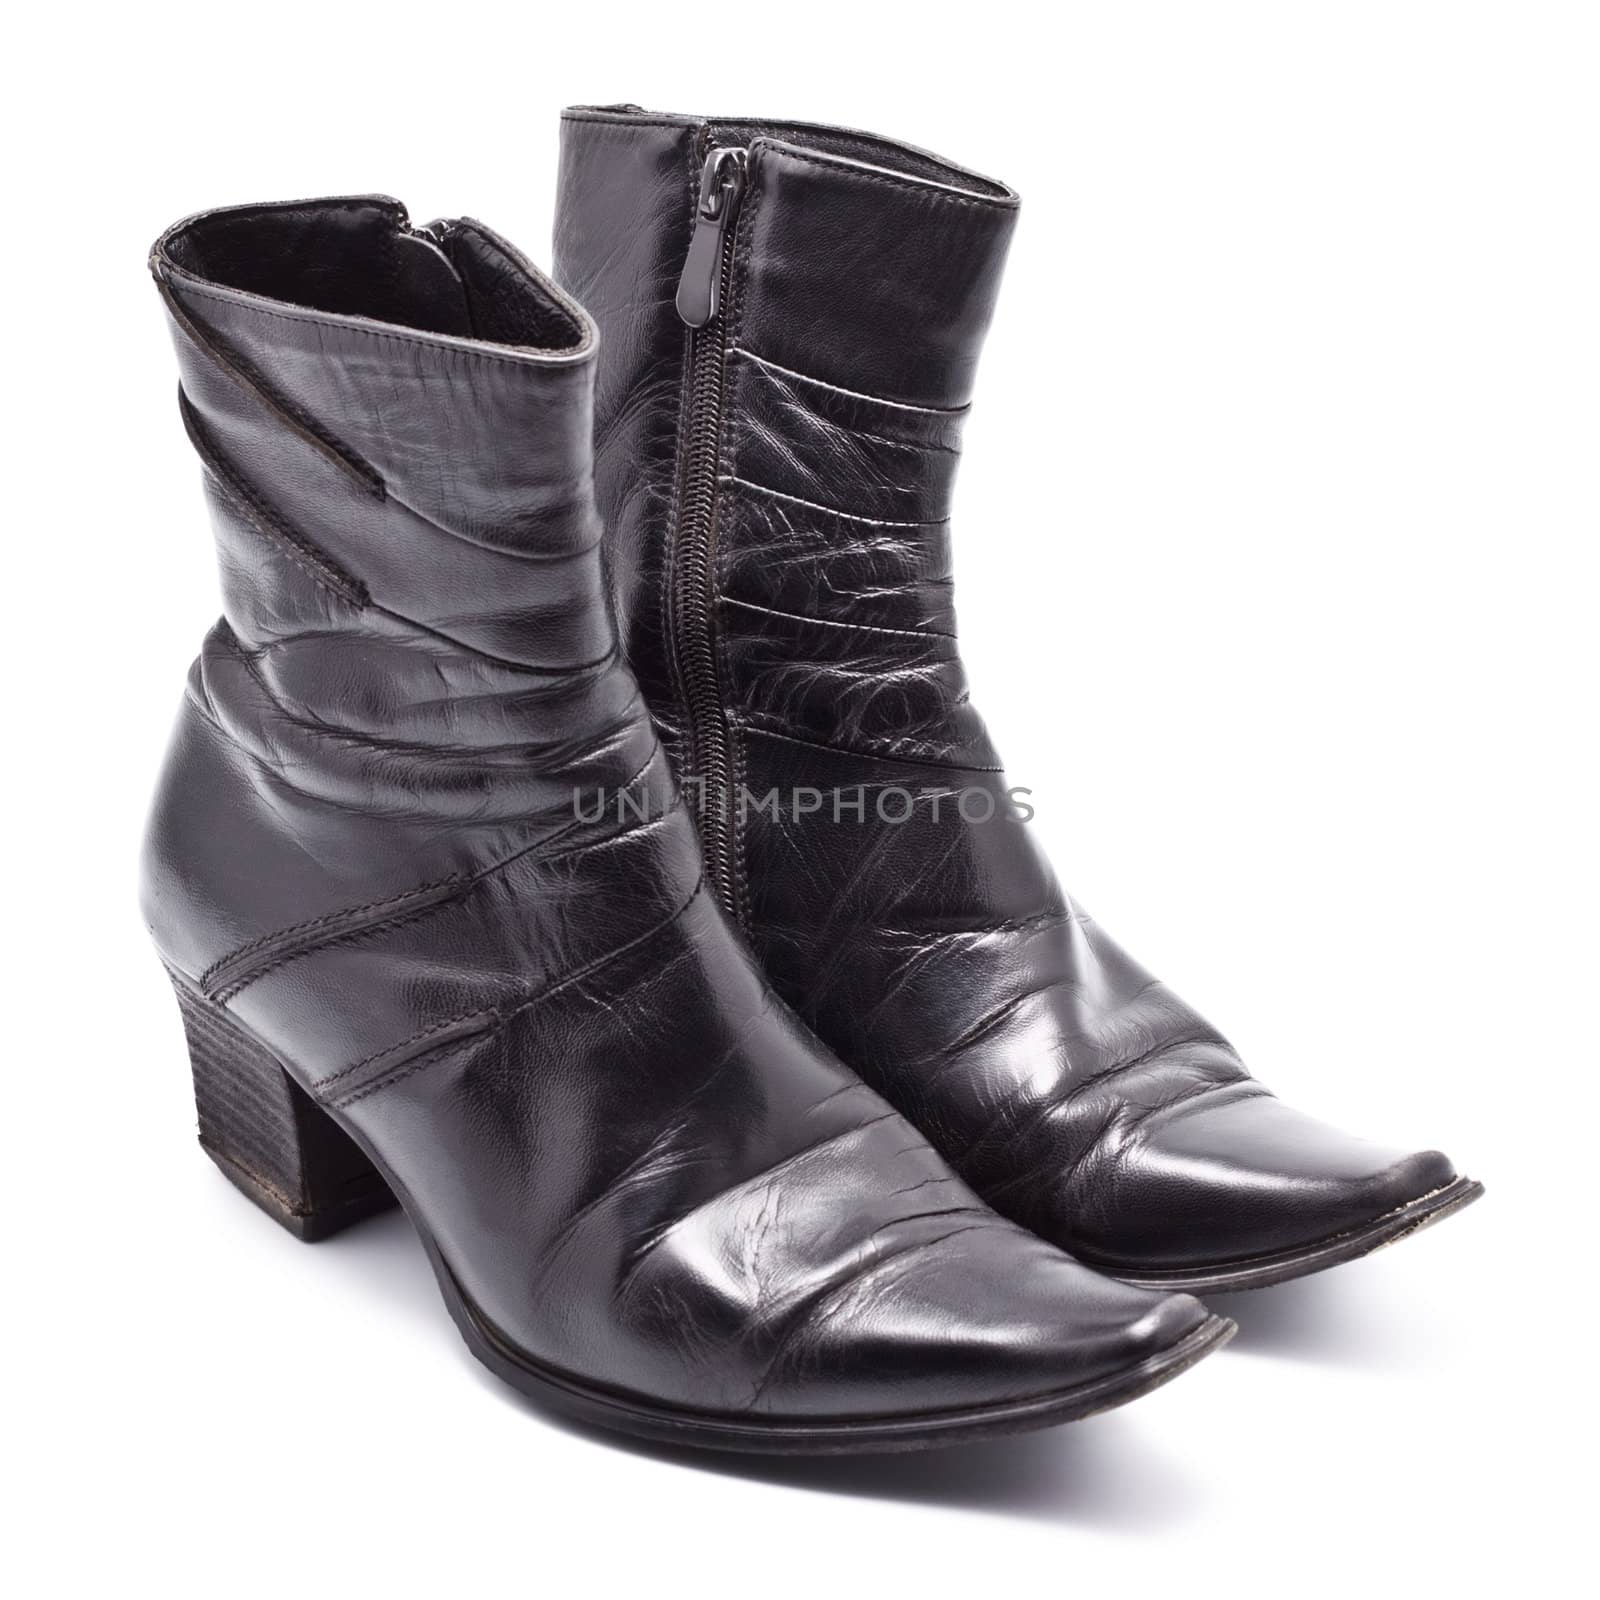 Black Leather Female Boots by petr_malyshev